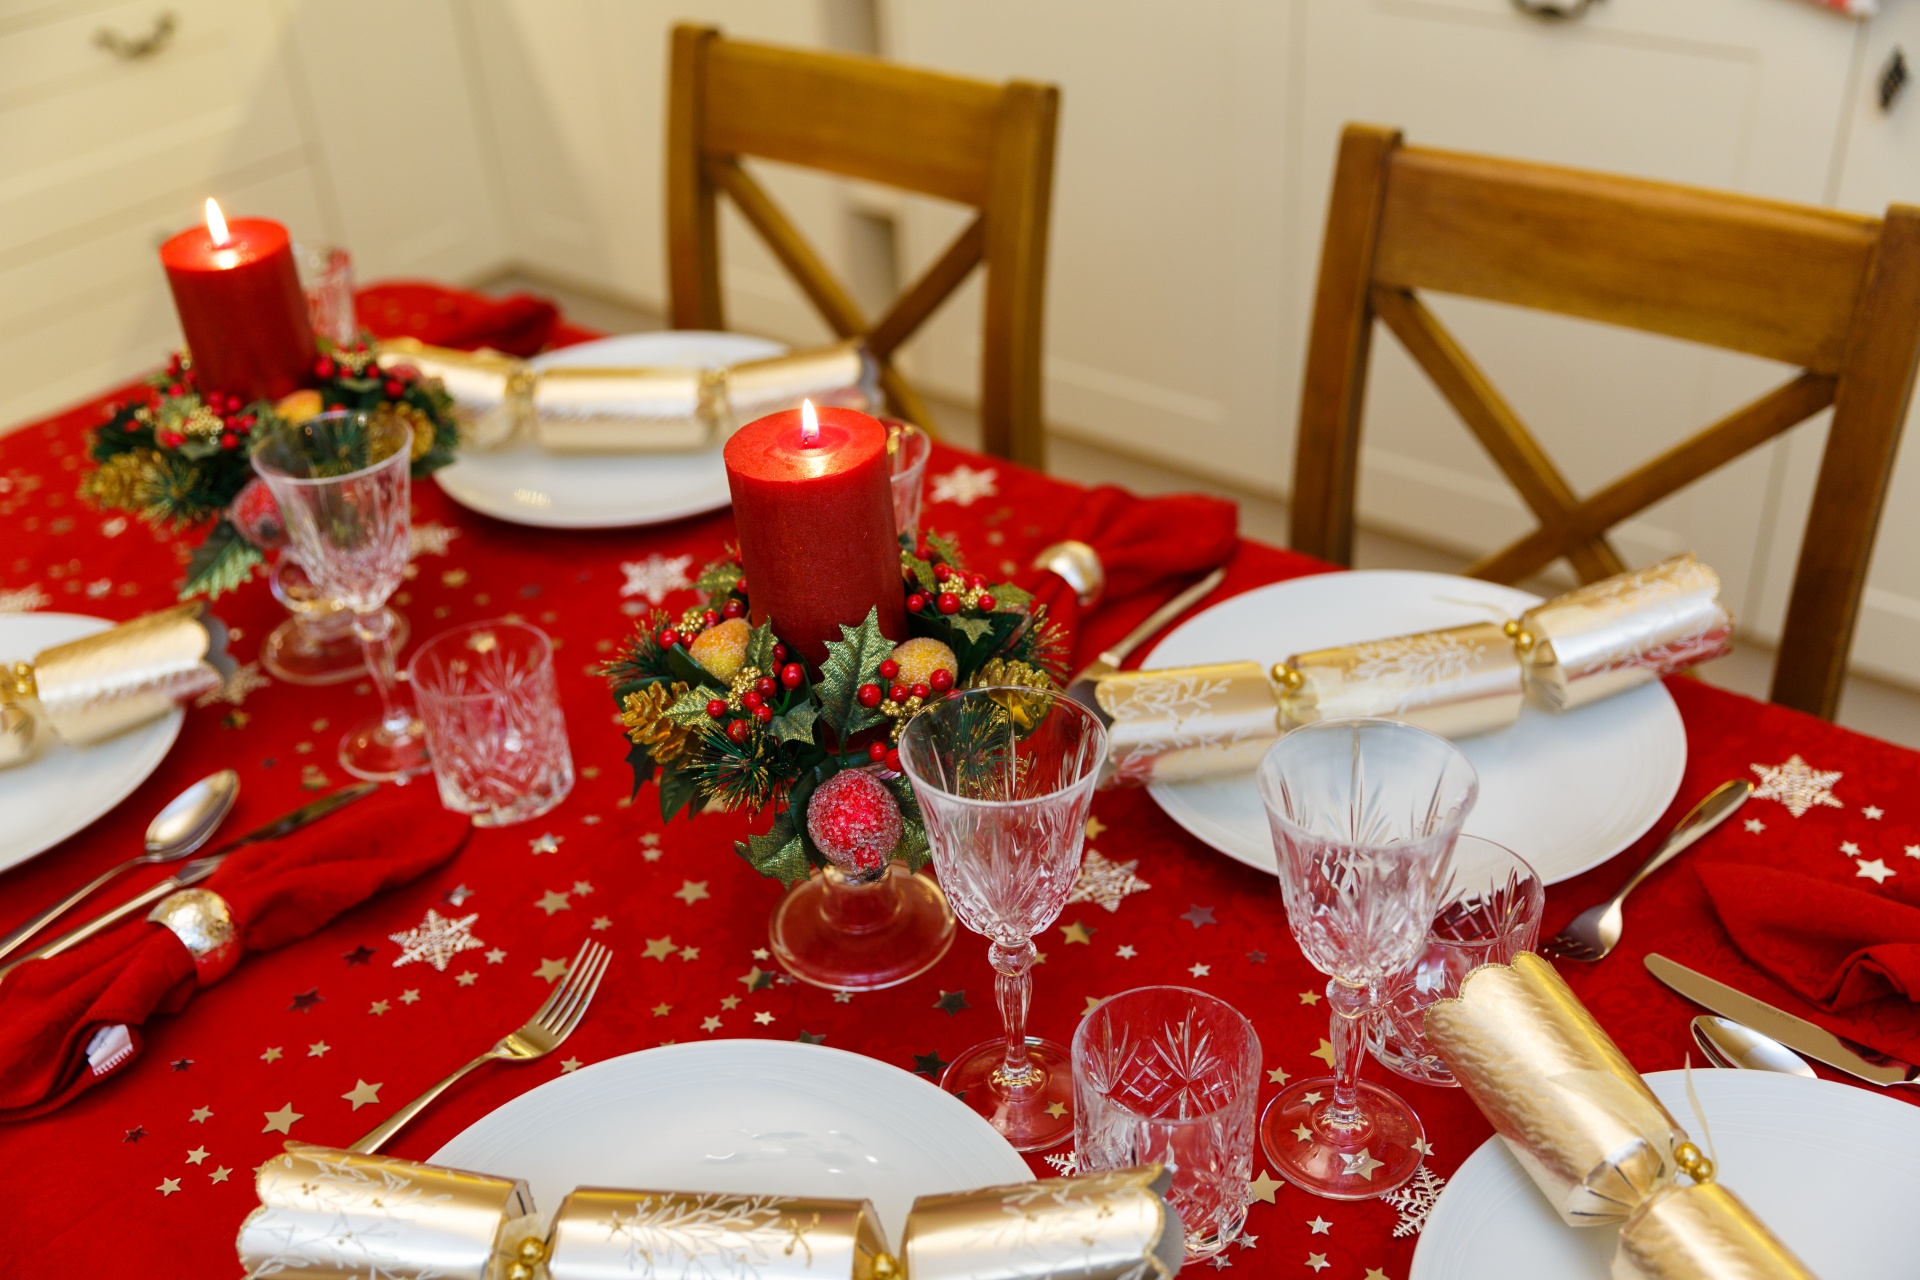 Christmas dinnerware and canldes